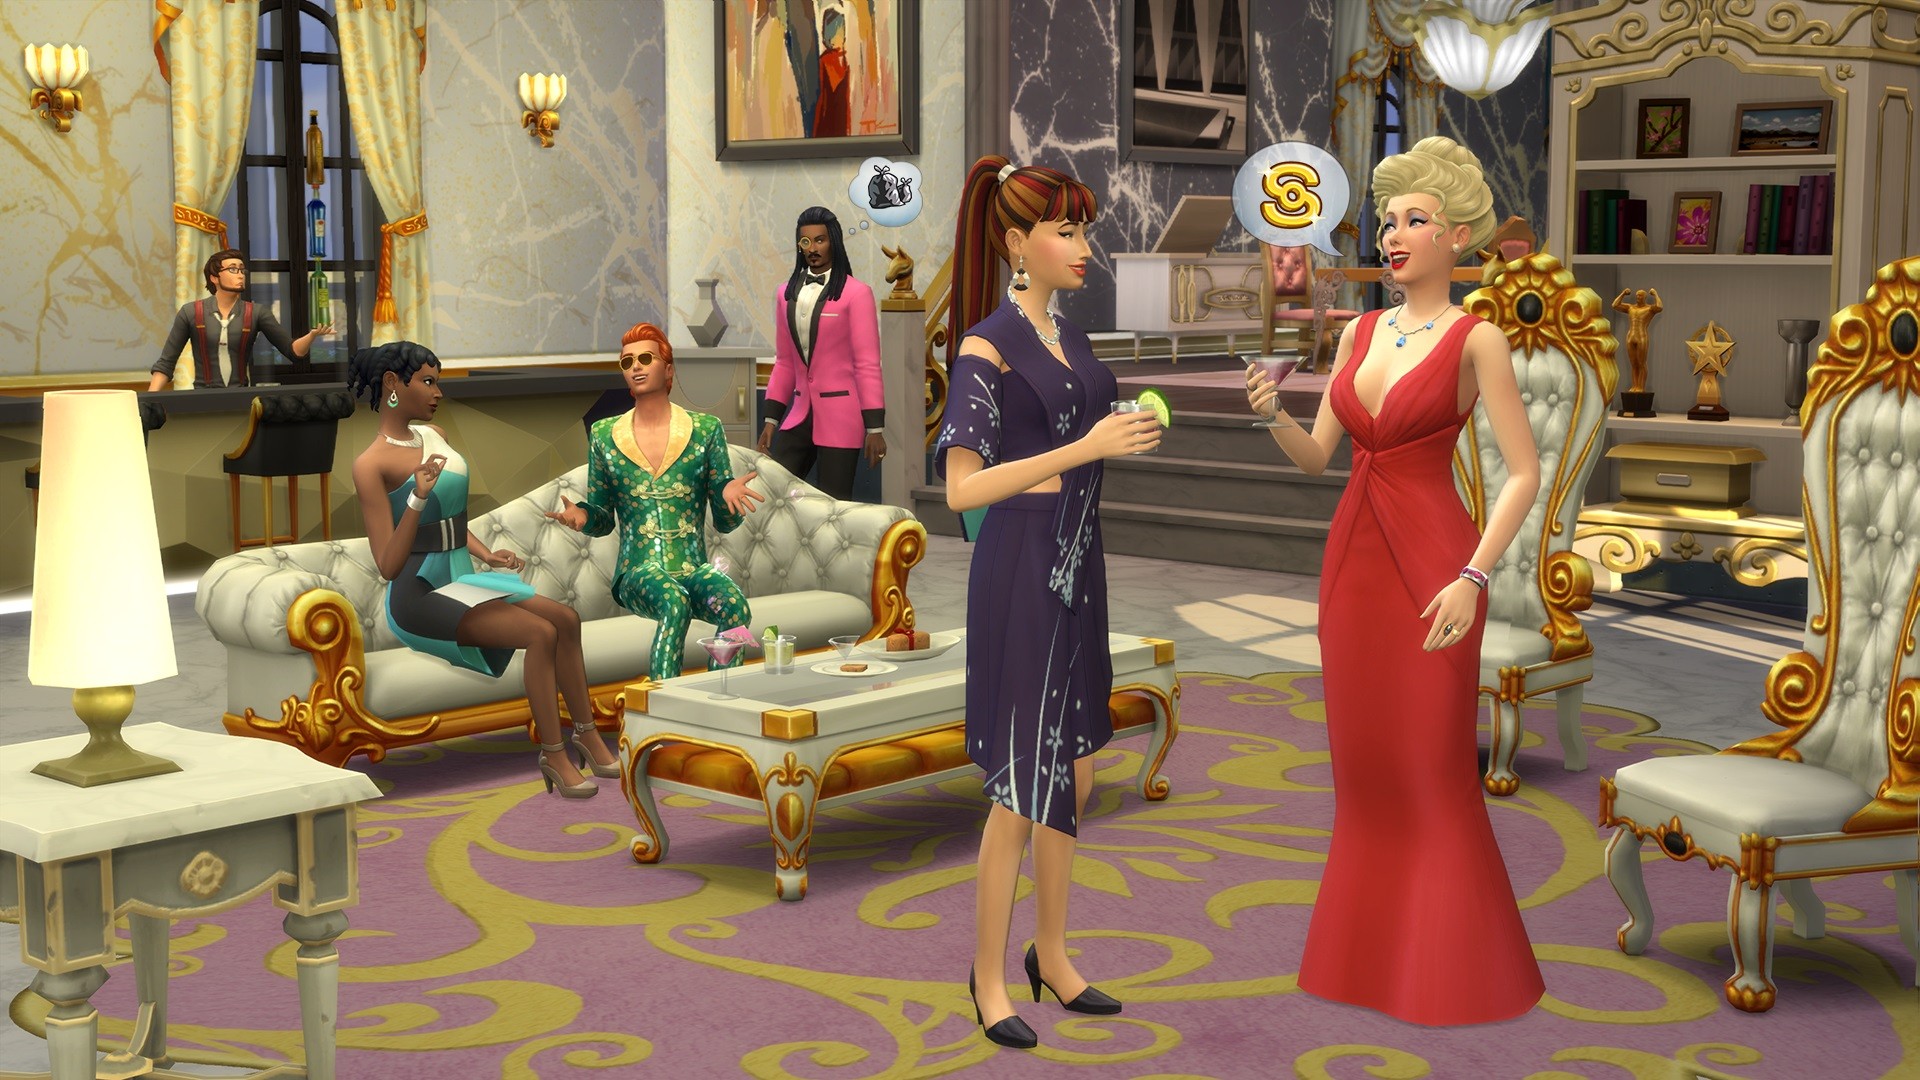 The Sims 4: Get Famous - screenshot 1